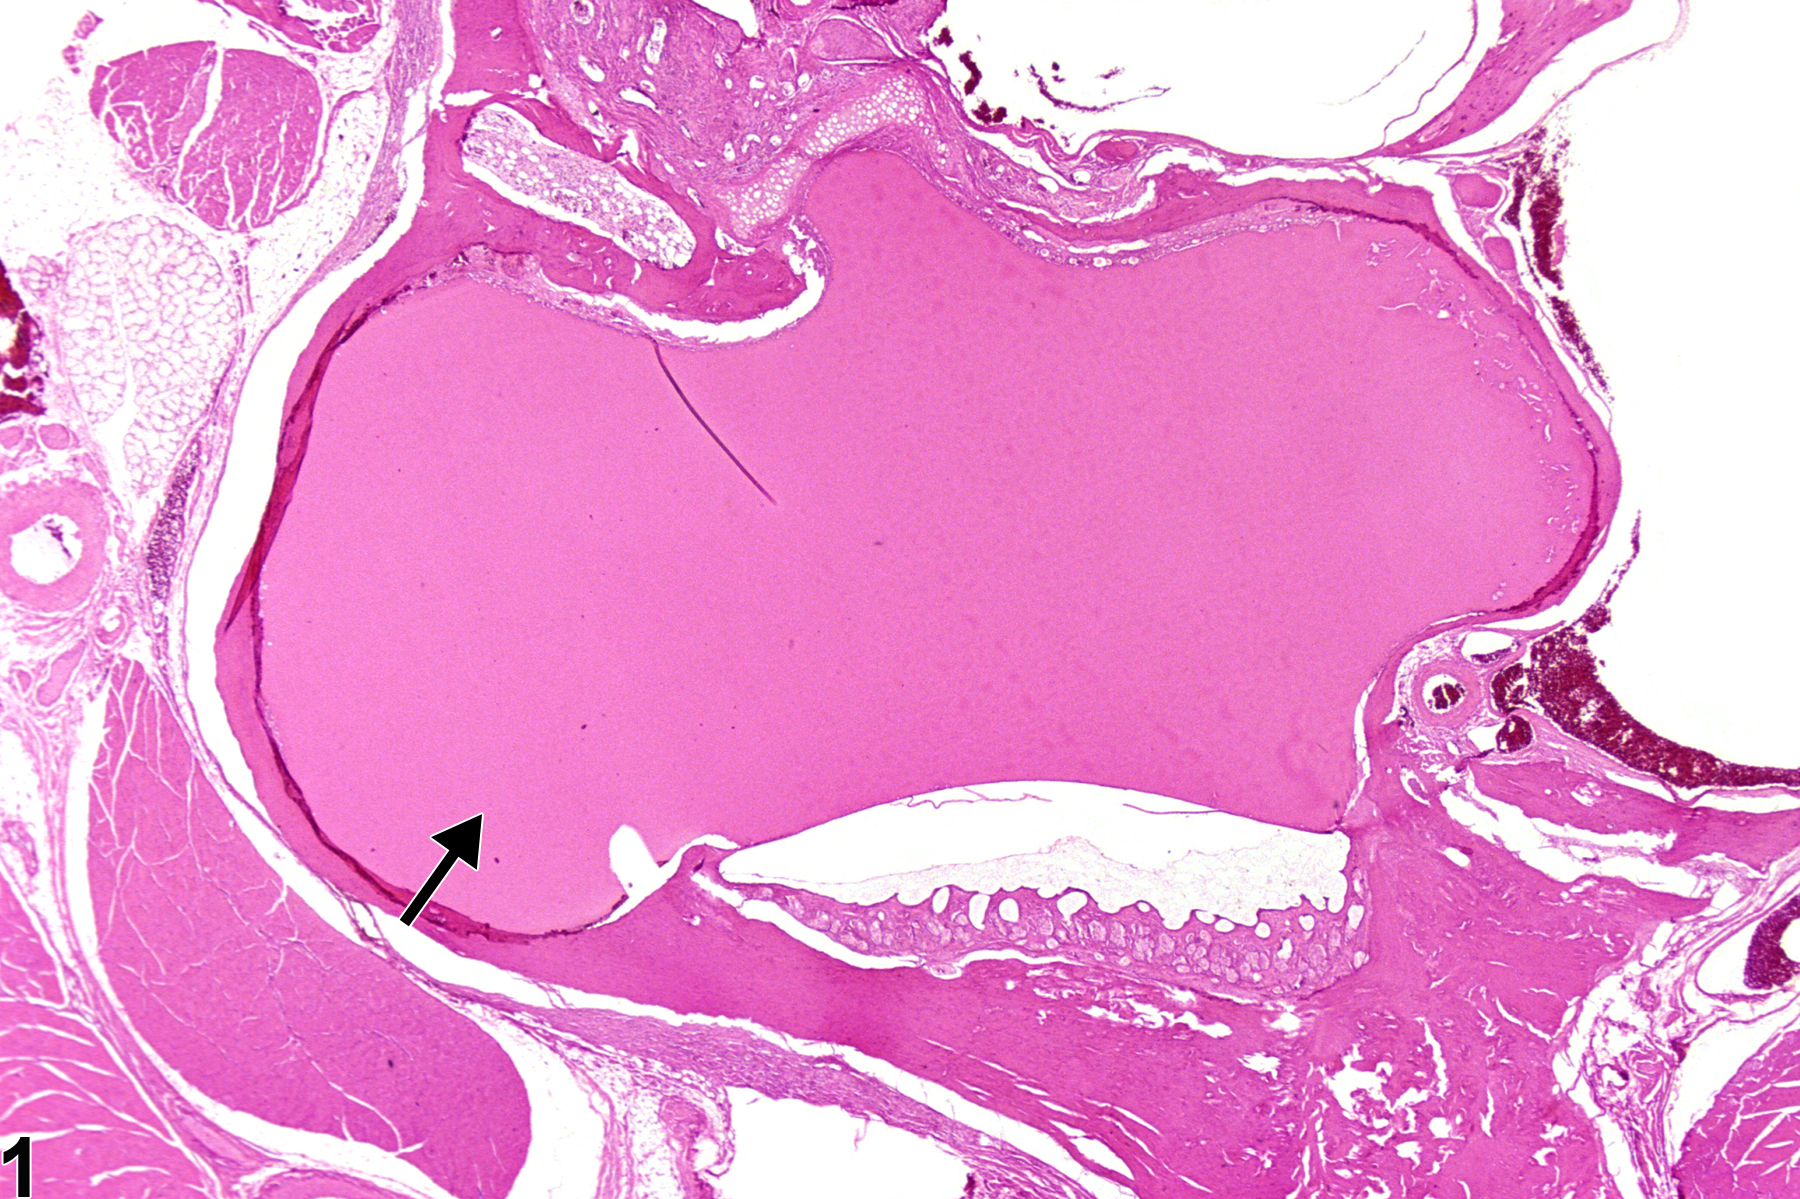 Image of proteinaceous fluid in the ear from a male F344/N rat in a chronic study